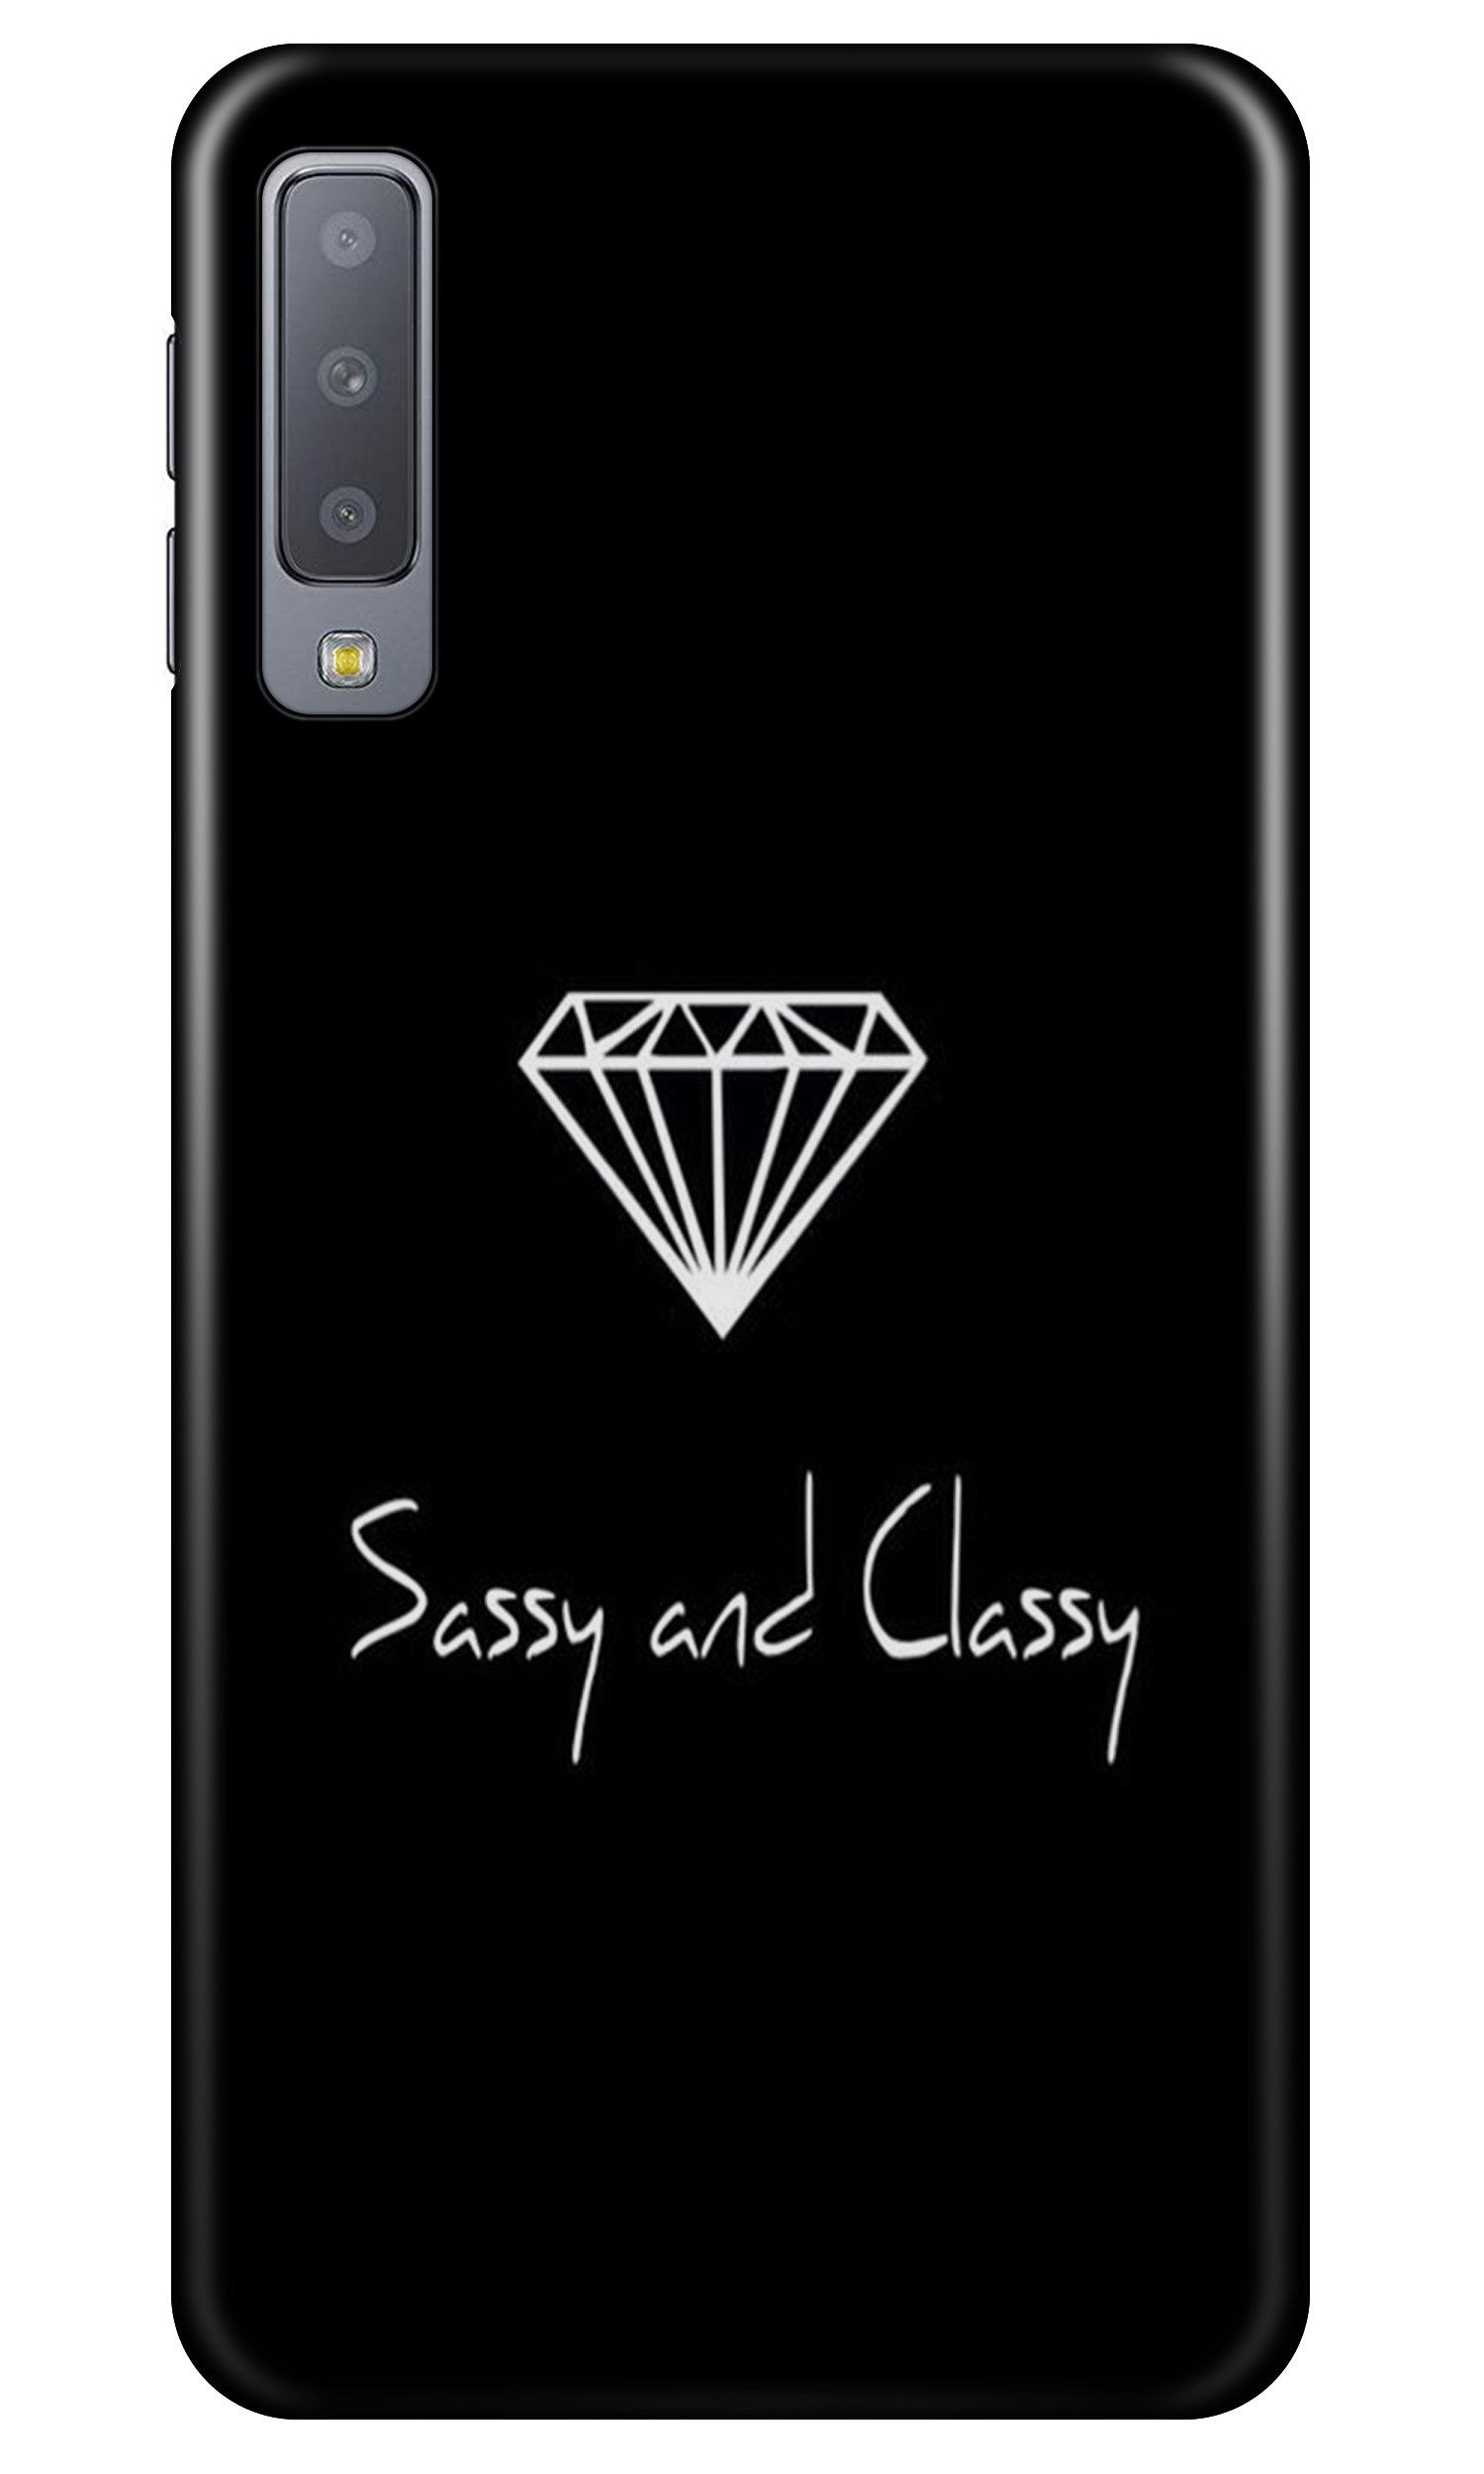 Sassy and Classy Case for Samung Galaxy A70s (Design No. 264)